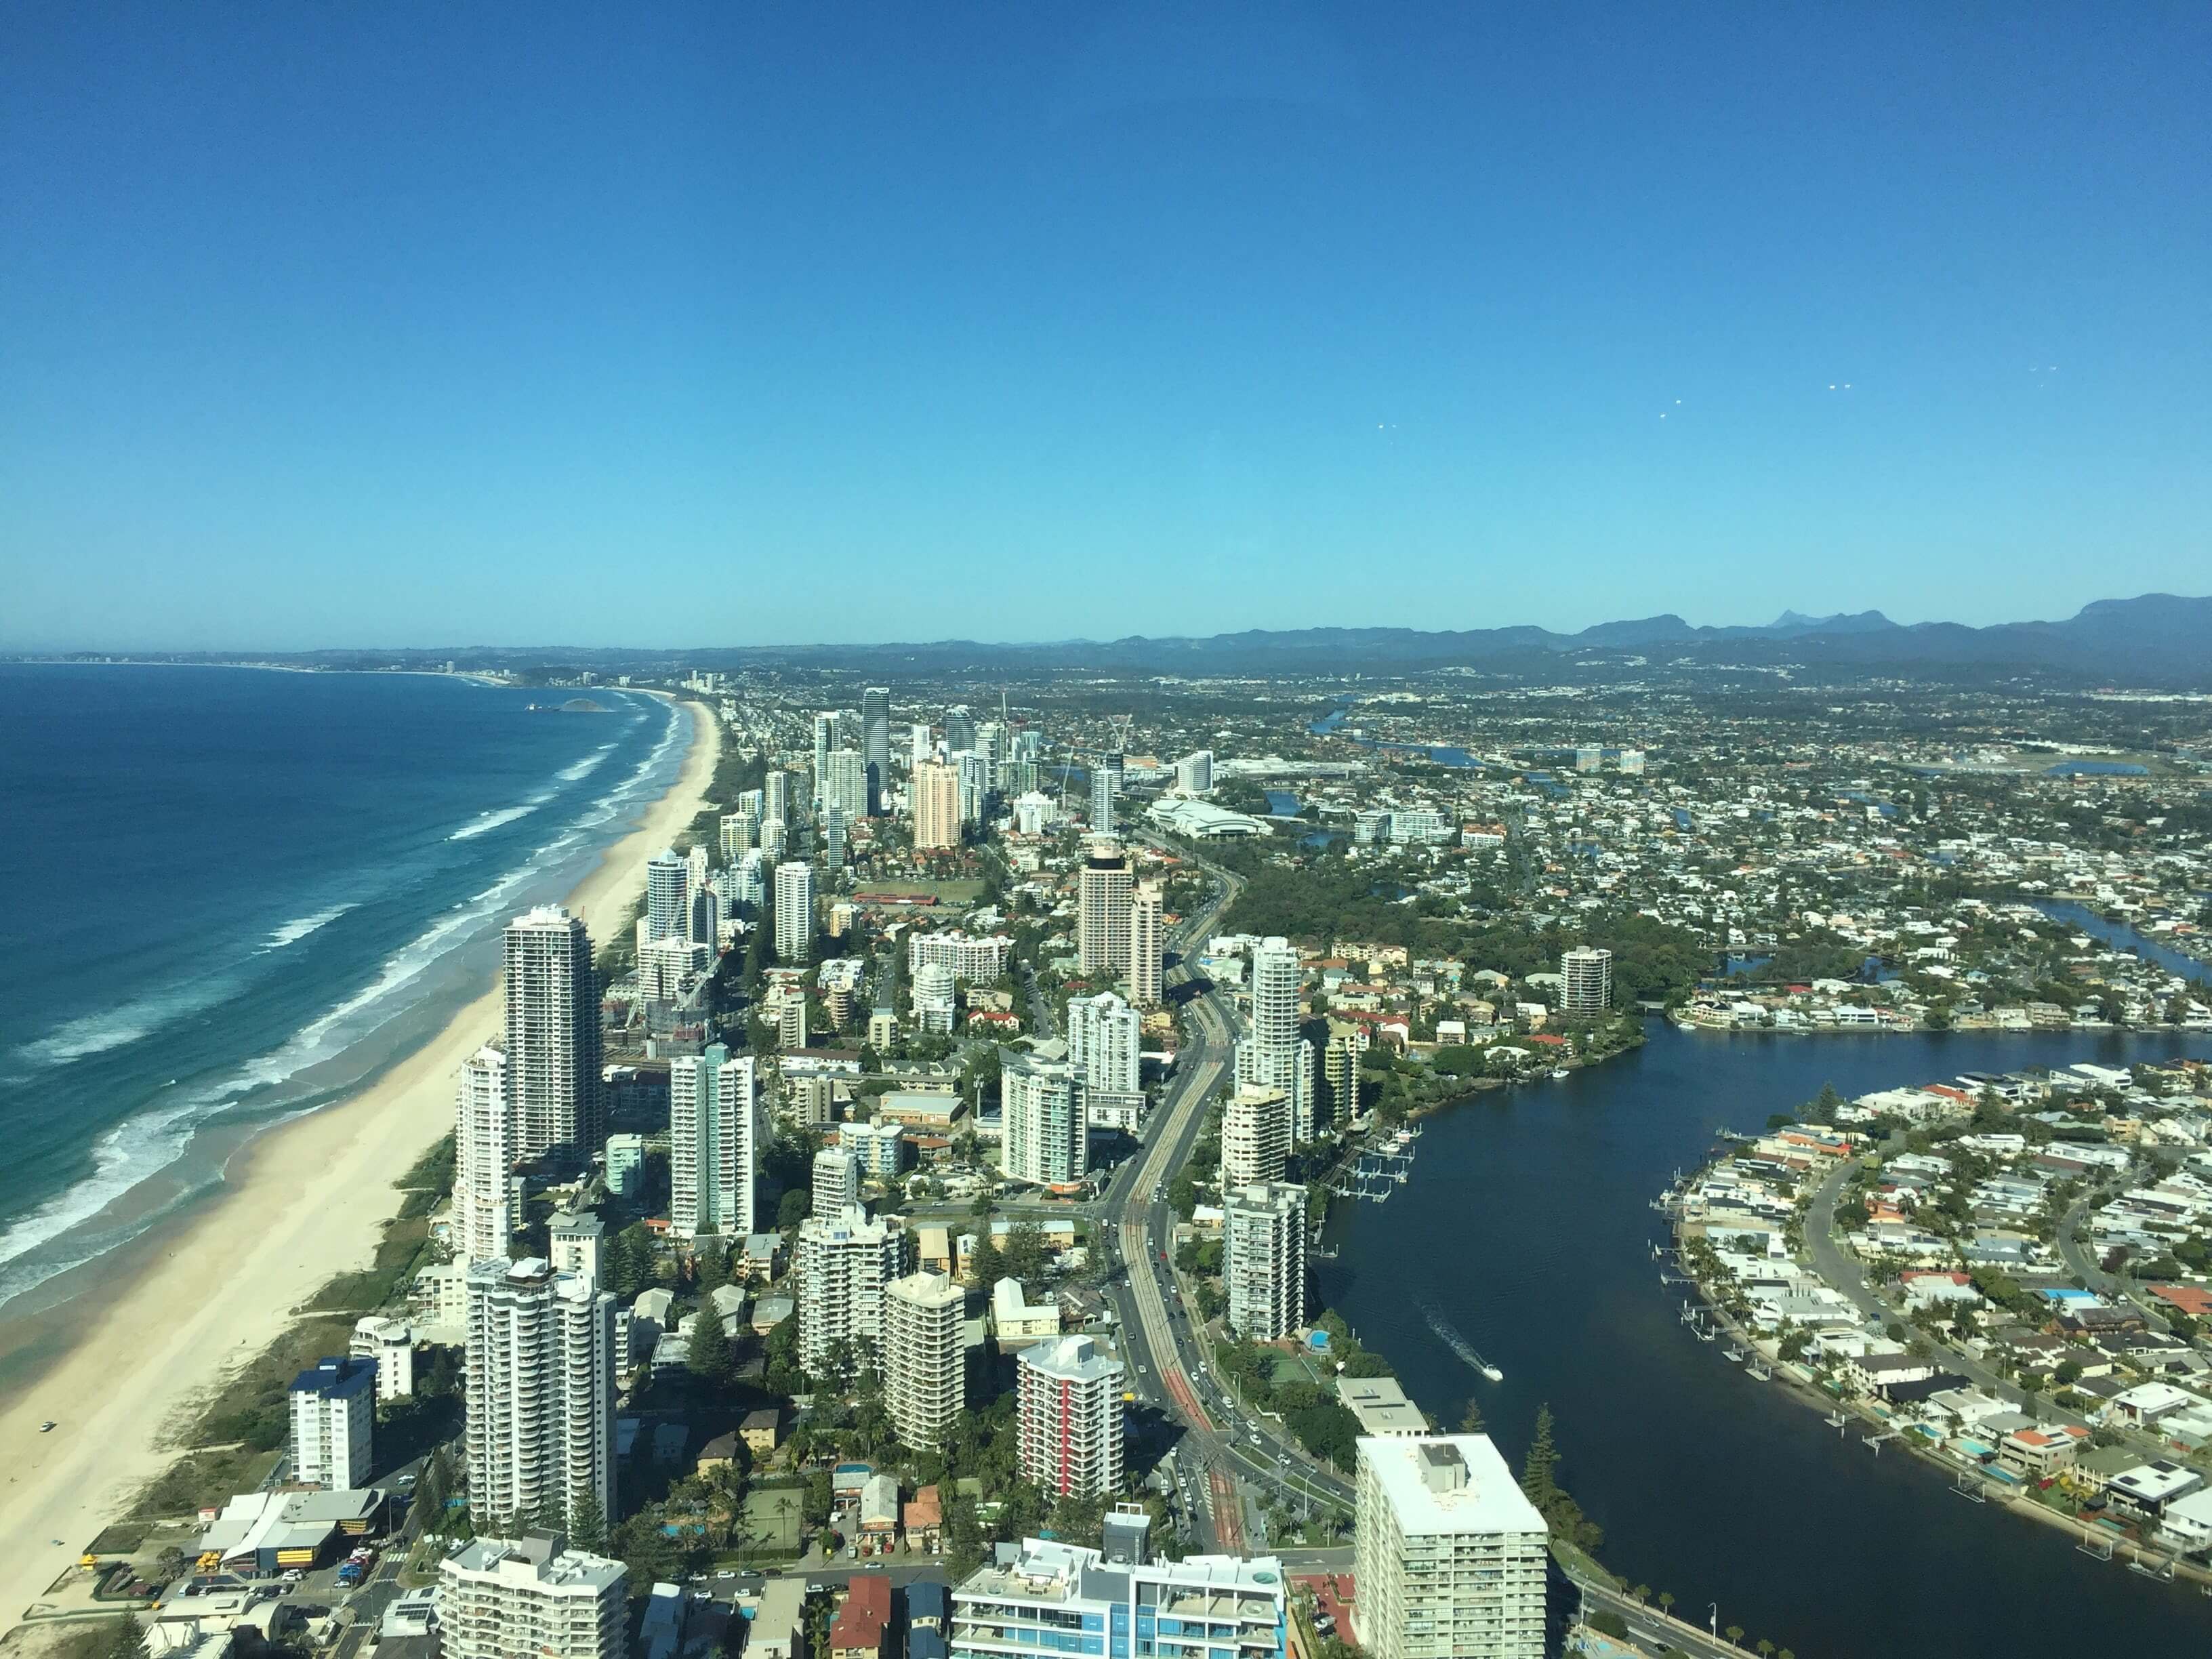 gold coast to cairns, sydney to cairns road trip distance, cairns to sydney itinerary 2 weeks, sydney to cairns map, sydney to cairns road trip stops, australia sydney to cairns itinerary, how long would it take to drive from cairns to sydney